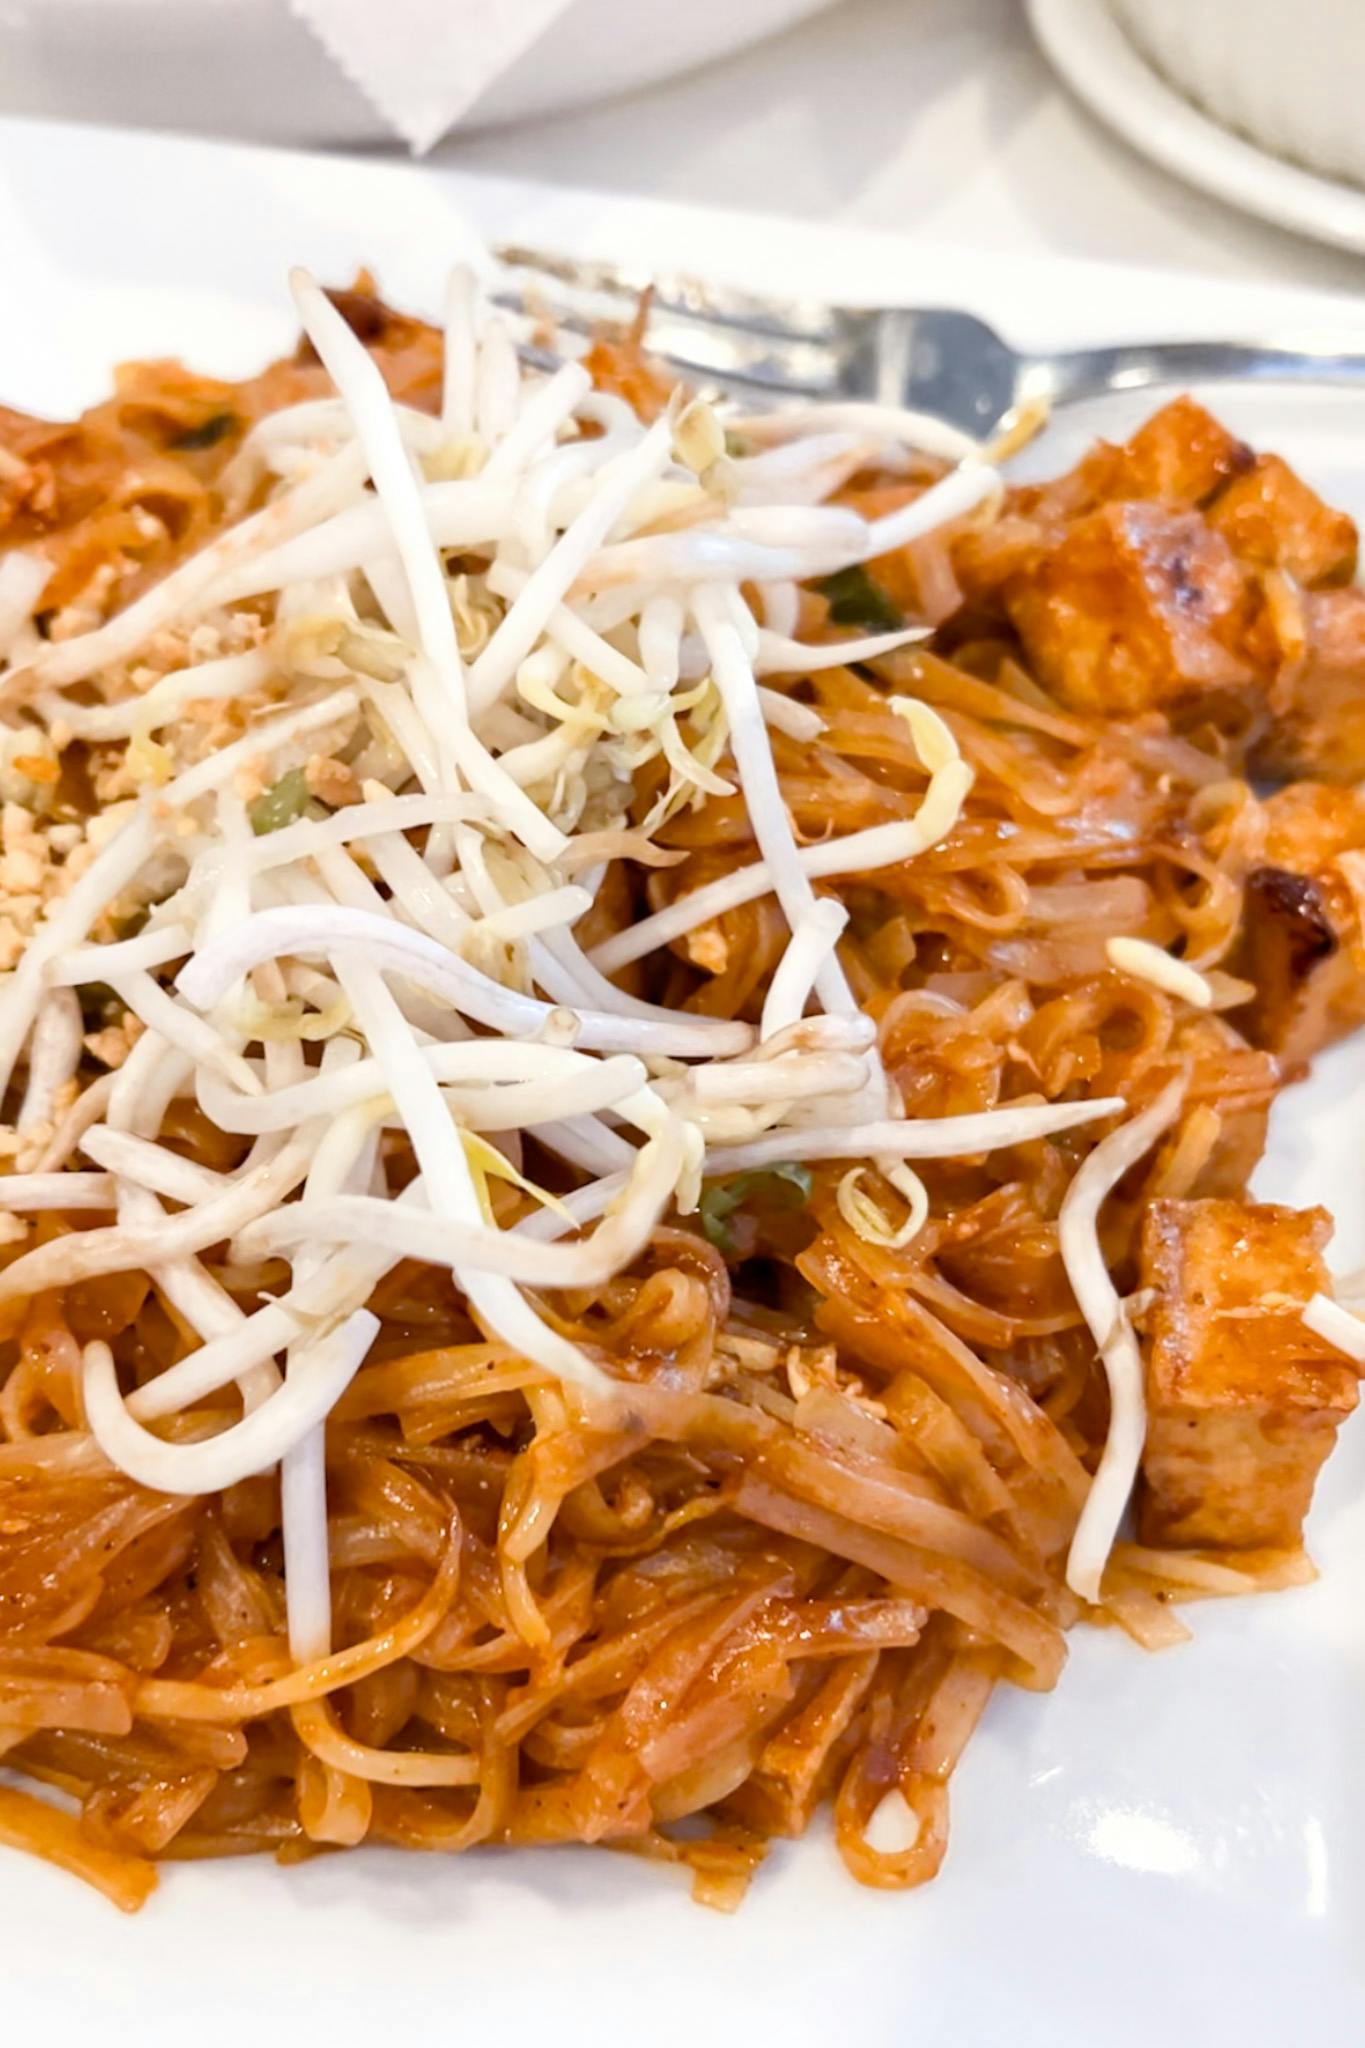 A plate of pad thai.